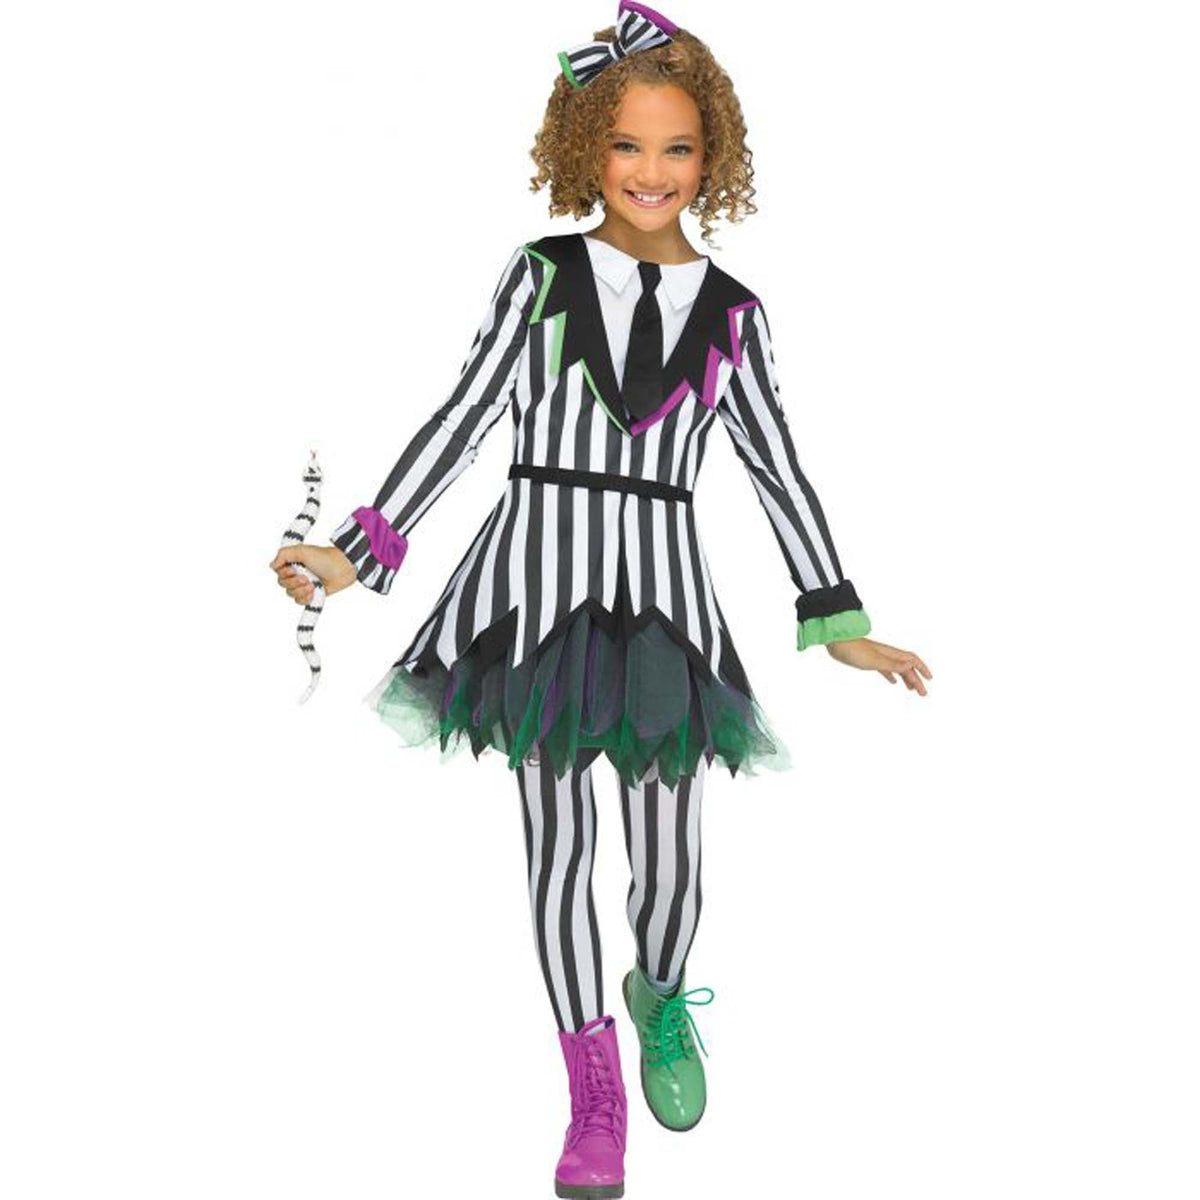 FUN WORLD Costumes Silly Spirit Costume for Kids, Black and White Striped Dress